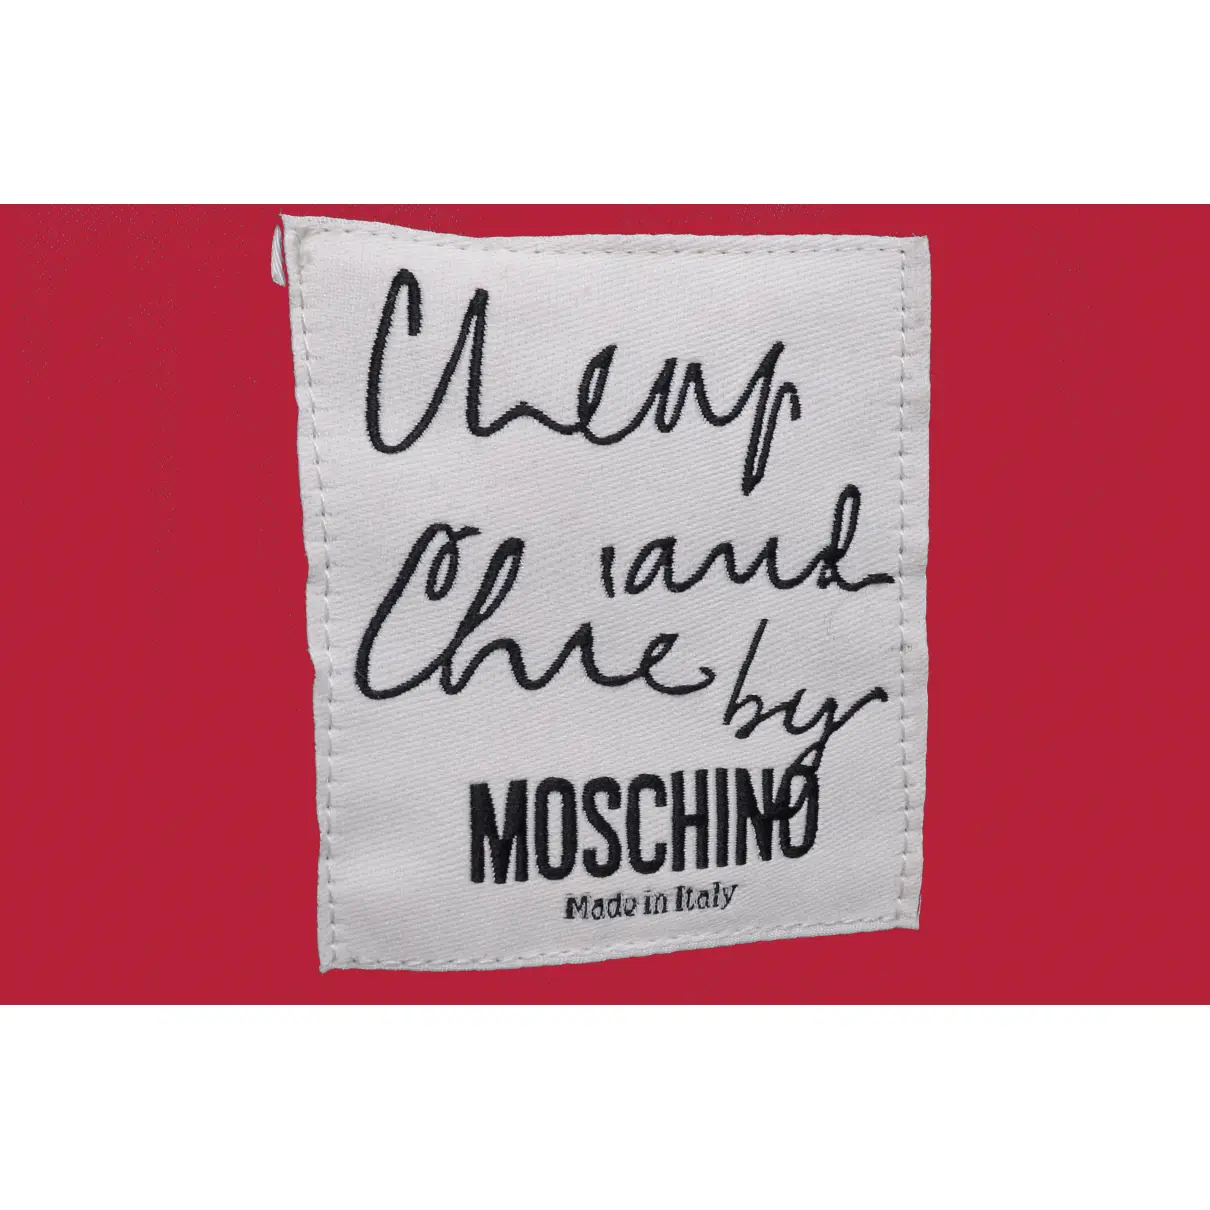 Mini dress Moschino Cheap And Chic - Vintage